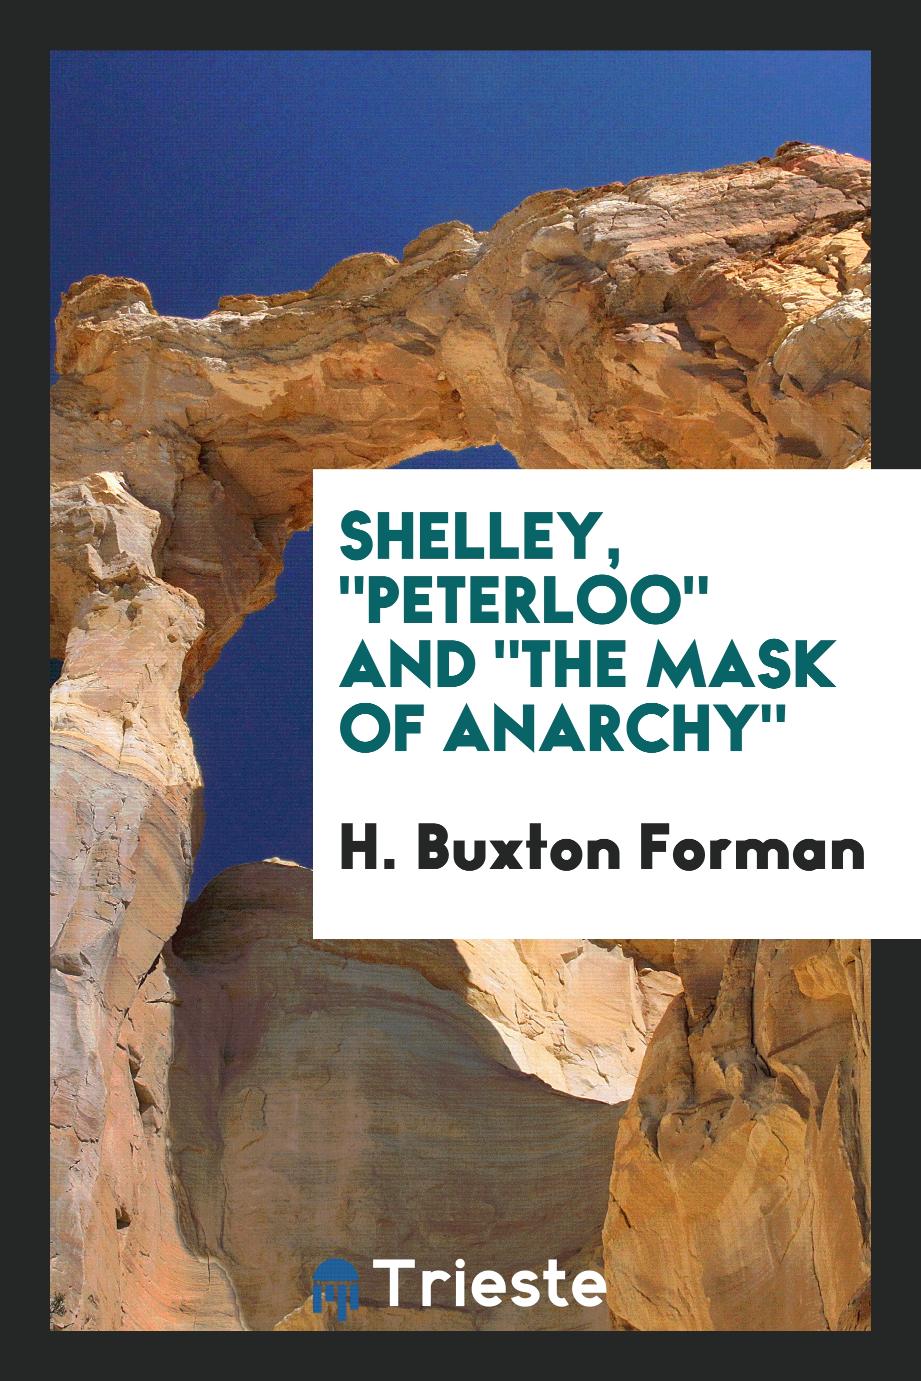 Shelley, "Peterloo" and "The Mask of Anarchy"